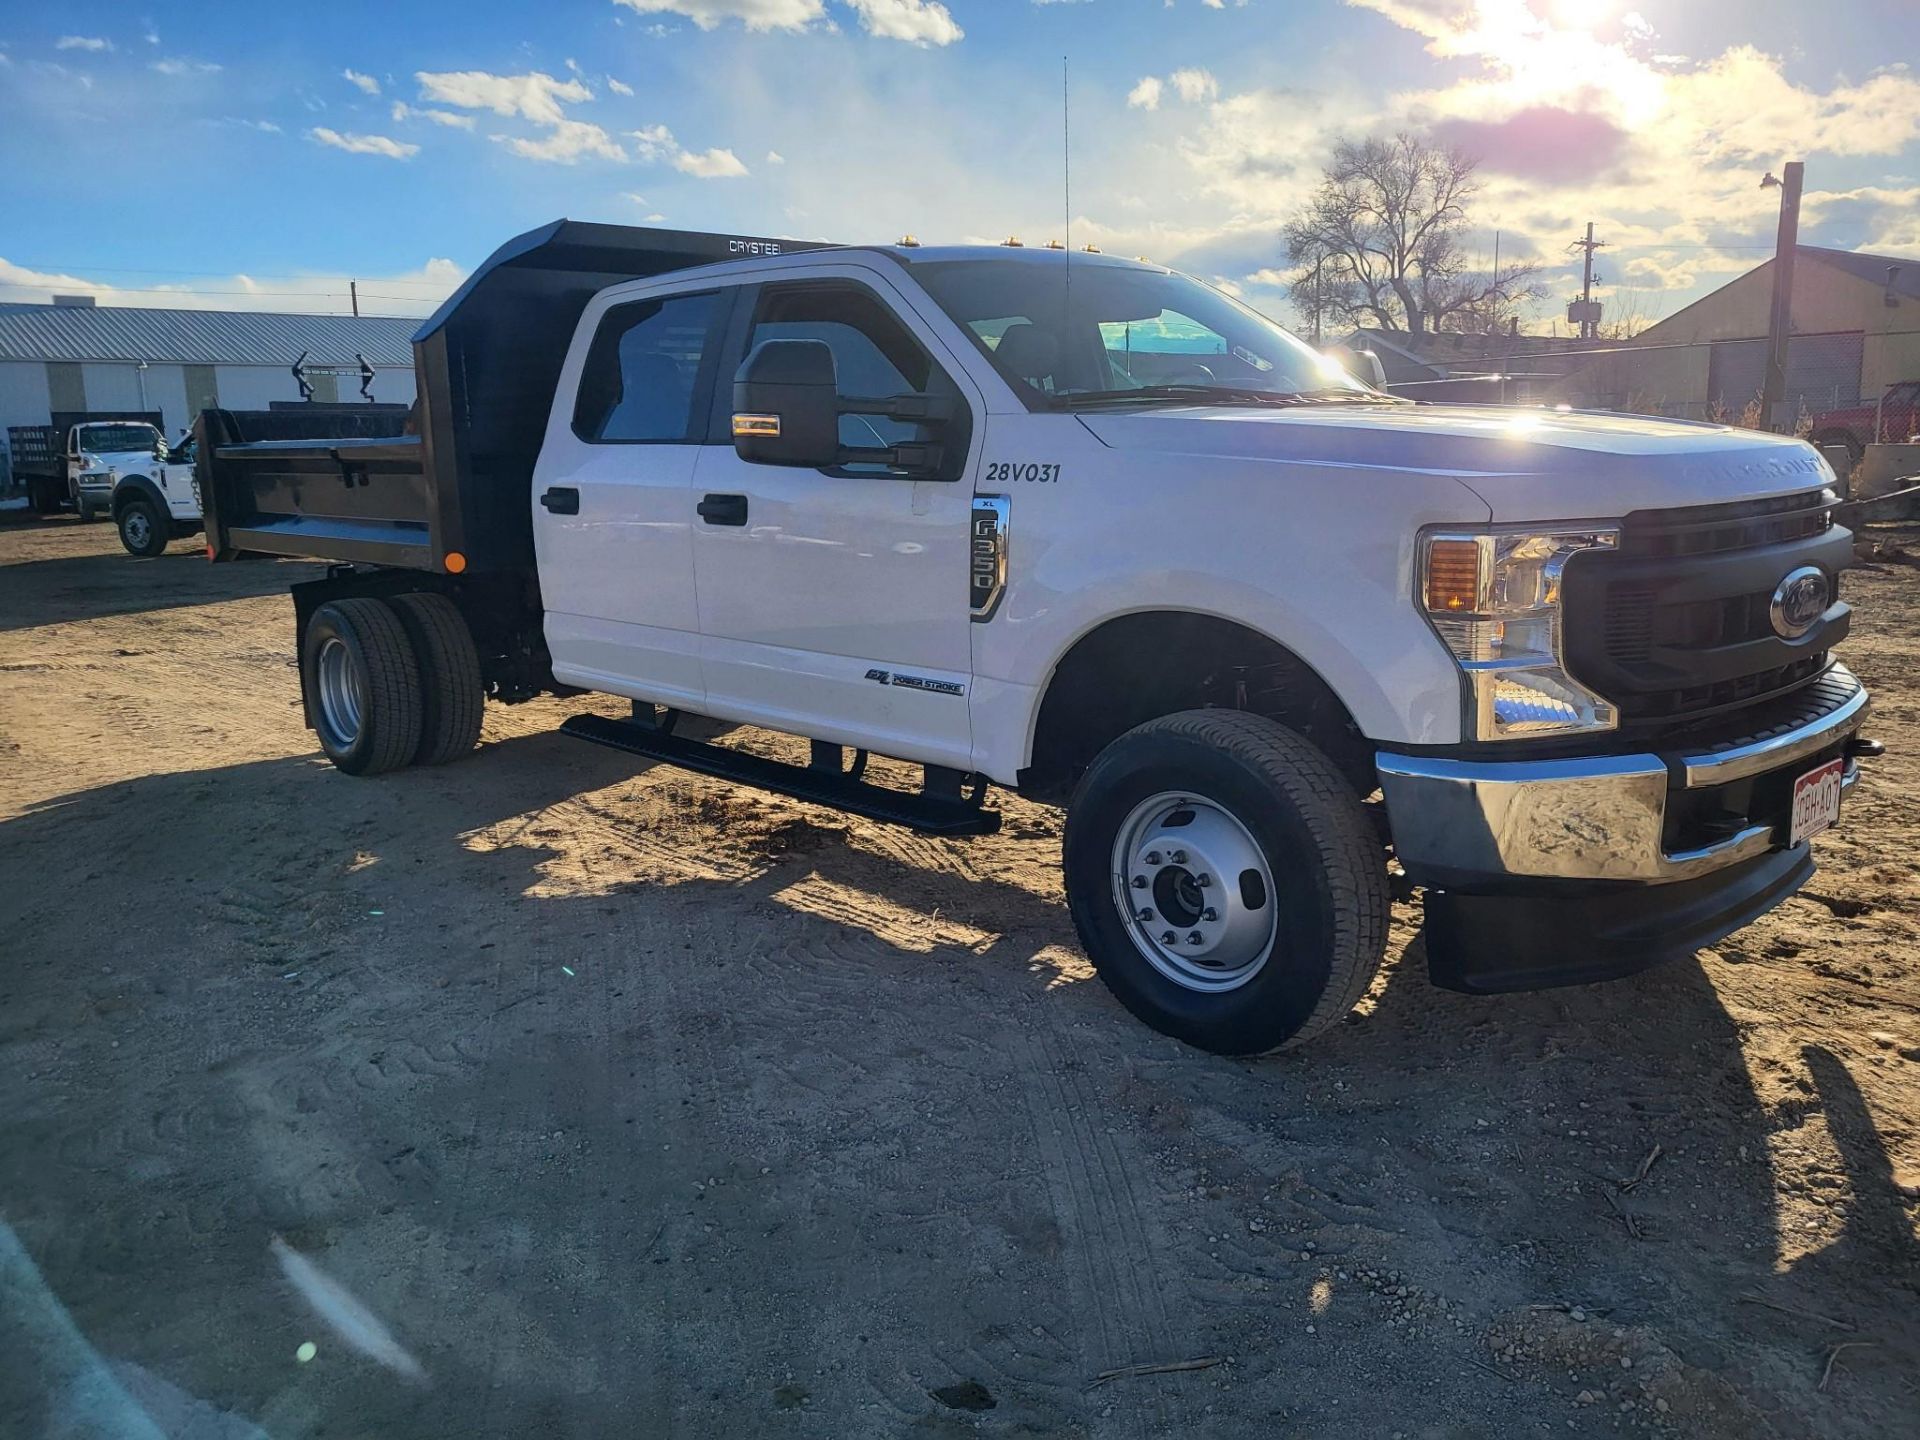 2021 FORD F350 CREW CAB DUALLY DIESEL FLATBED DUMP TRUCK 19,500 MILES! - Image 5 of 37